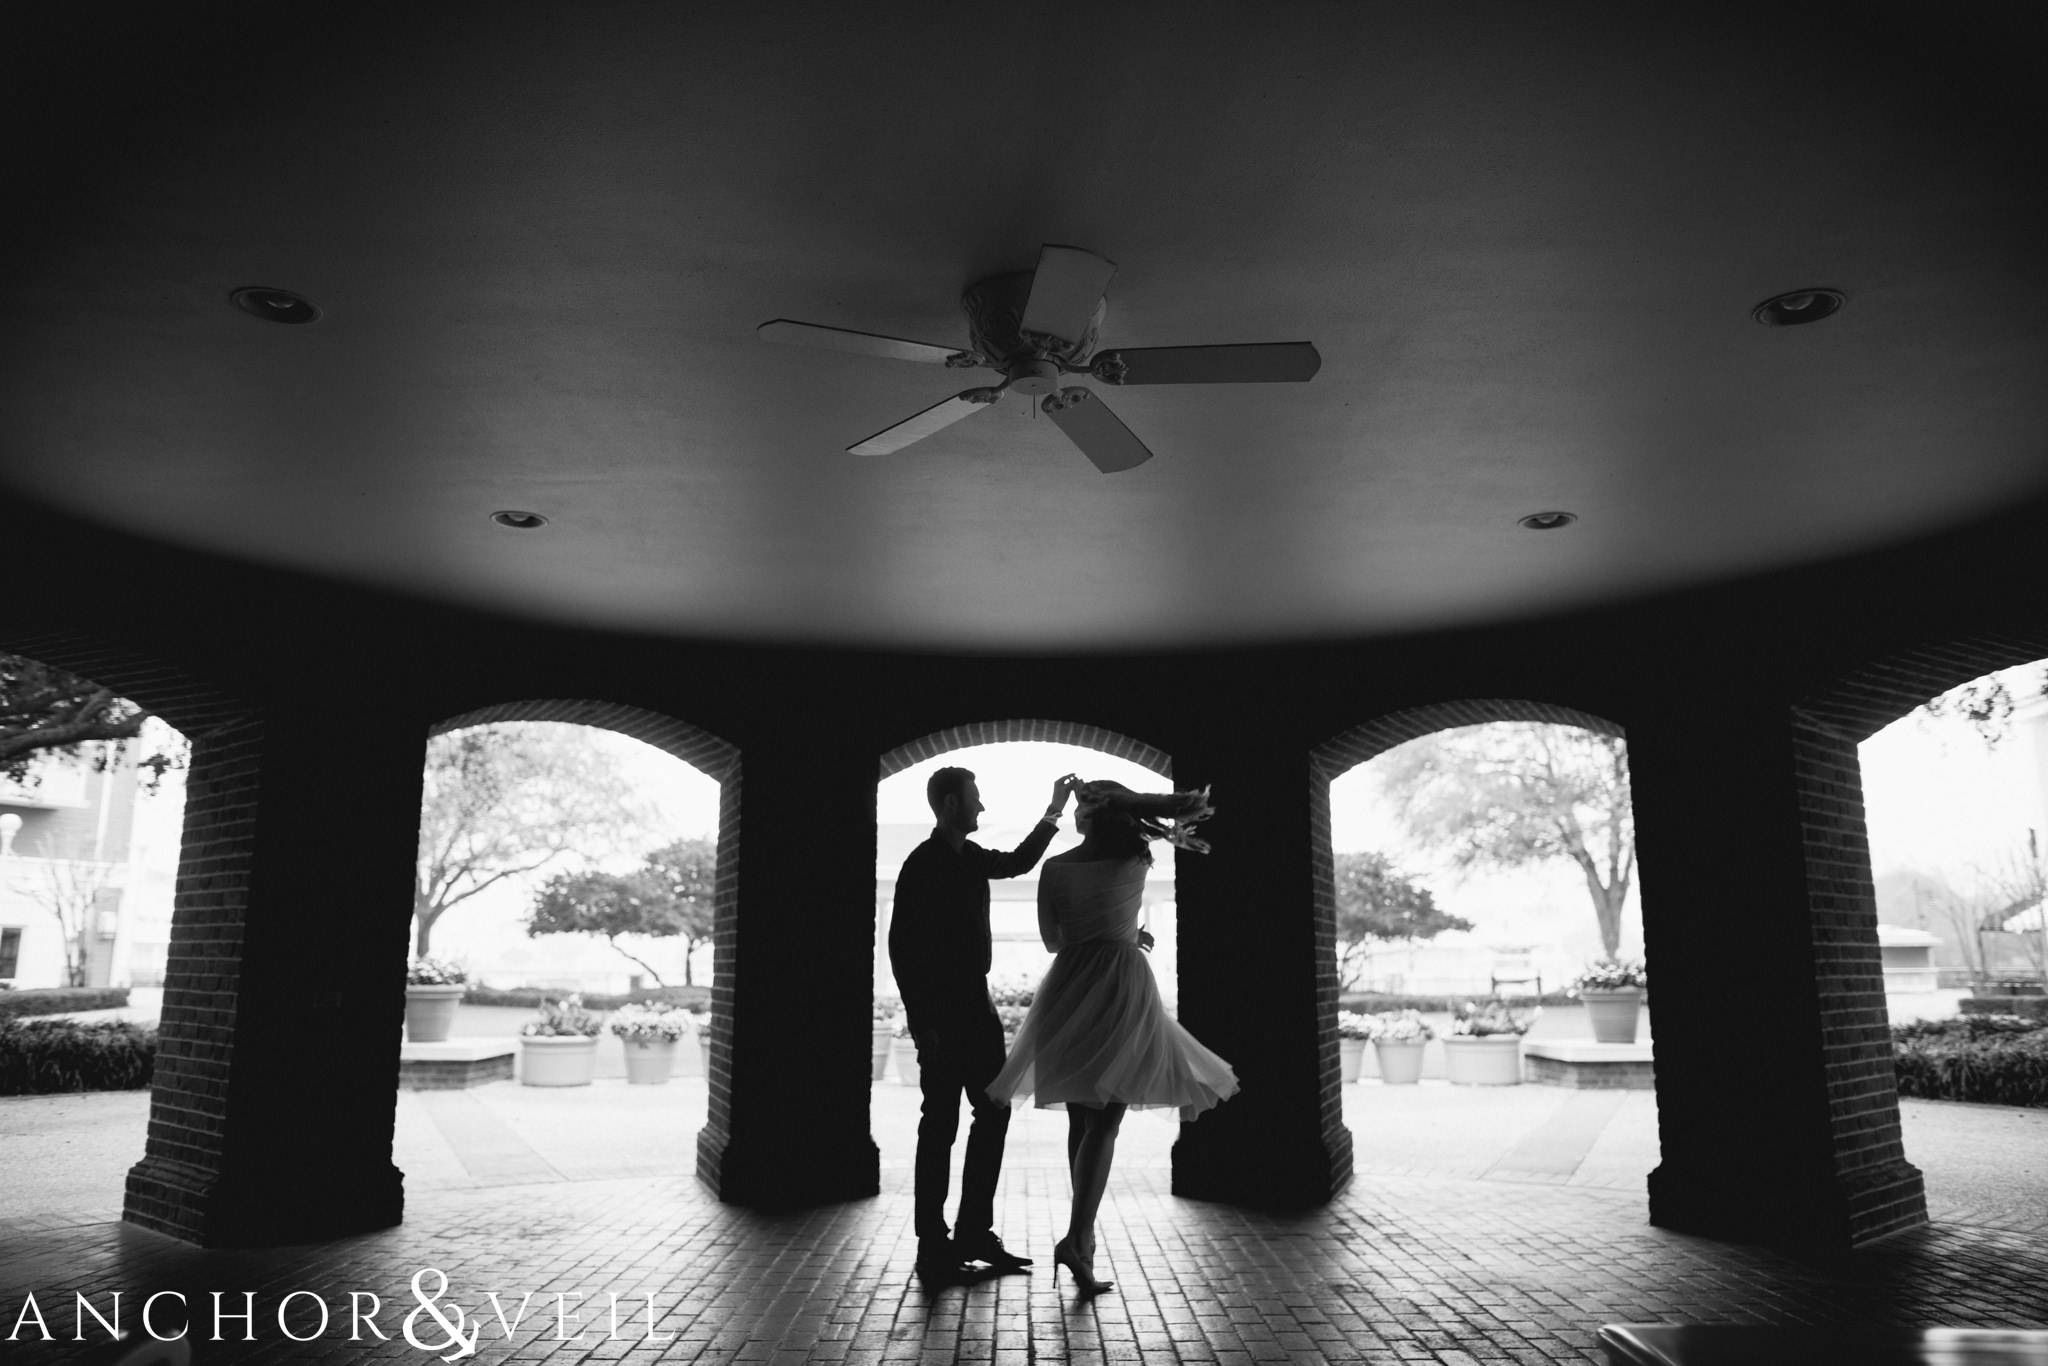 twirling her in the arches during their Disney world engagement session at the Boardwalk Hotel Inn